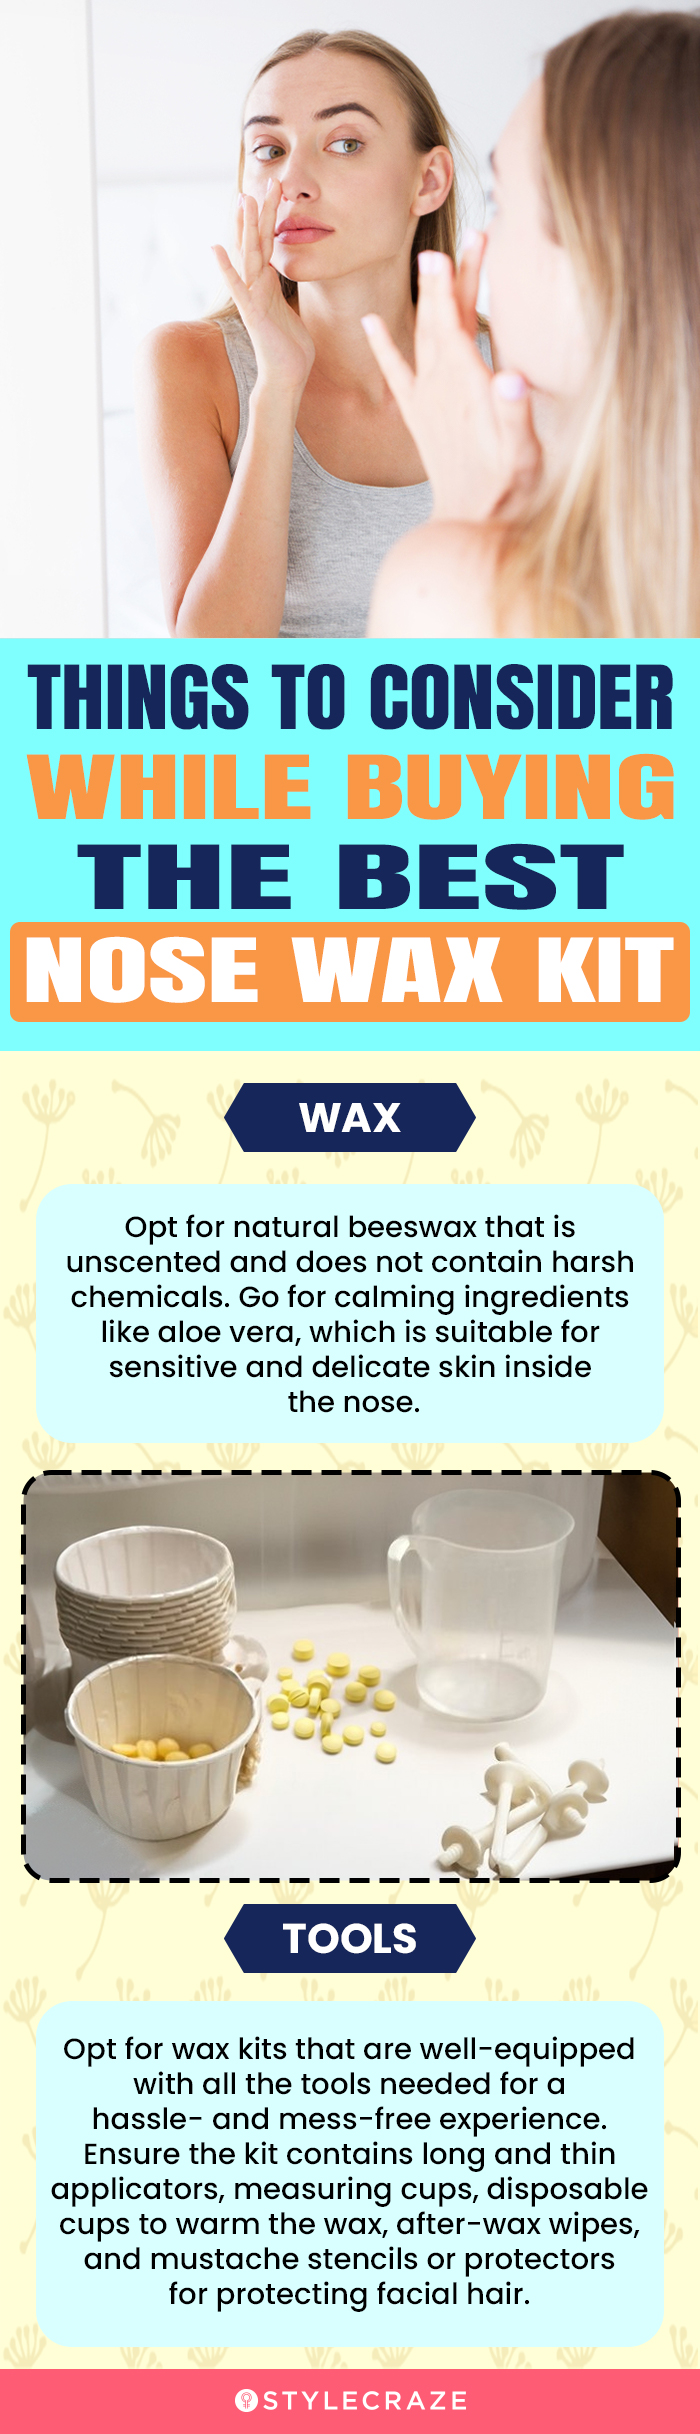 Best DIY Wax Kit: How to Wax Nose and Ear Hair Pain-Free